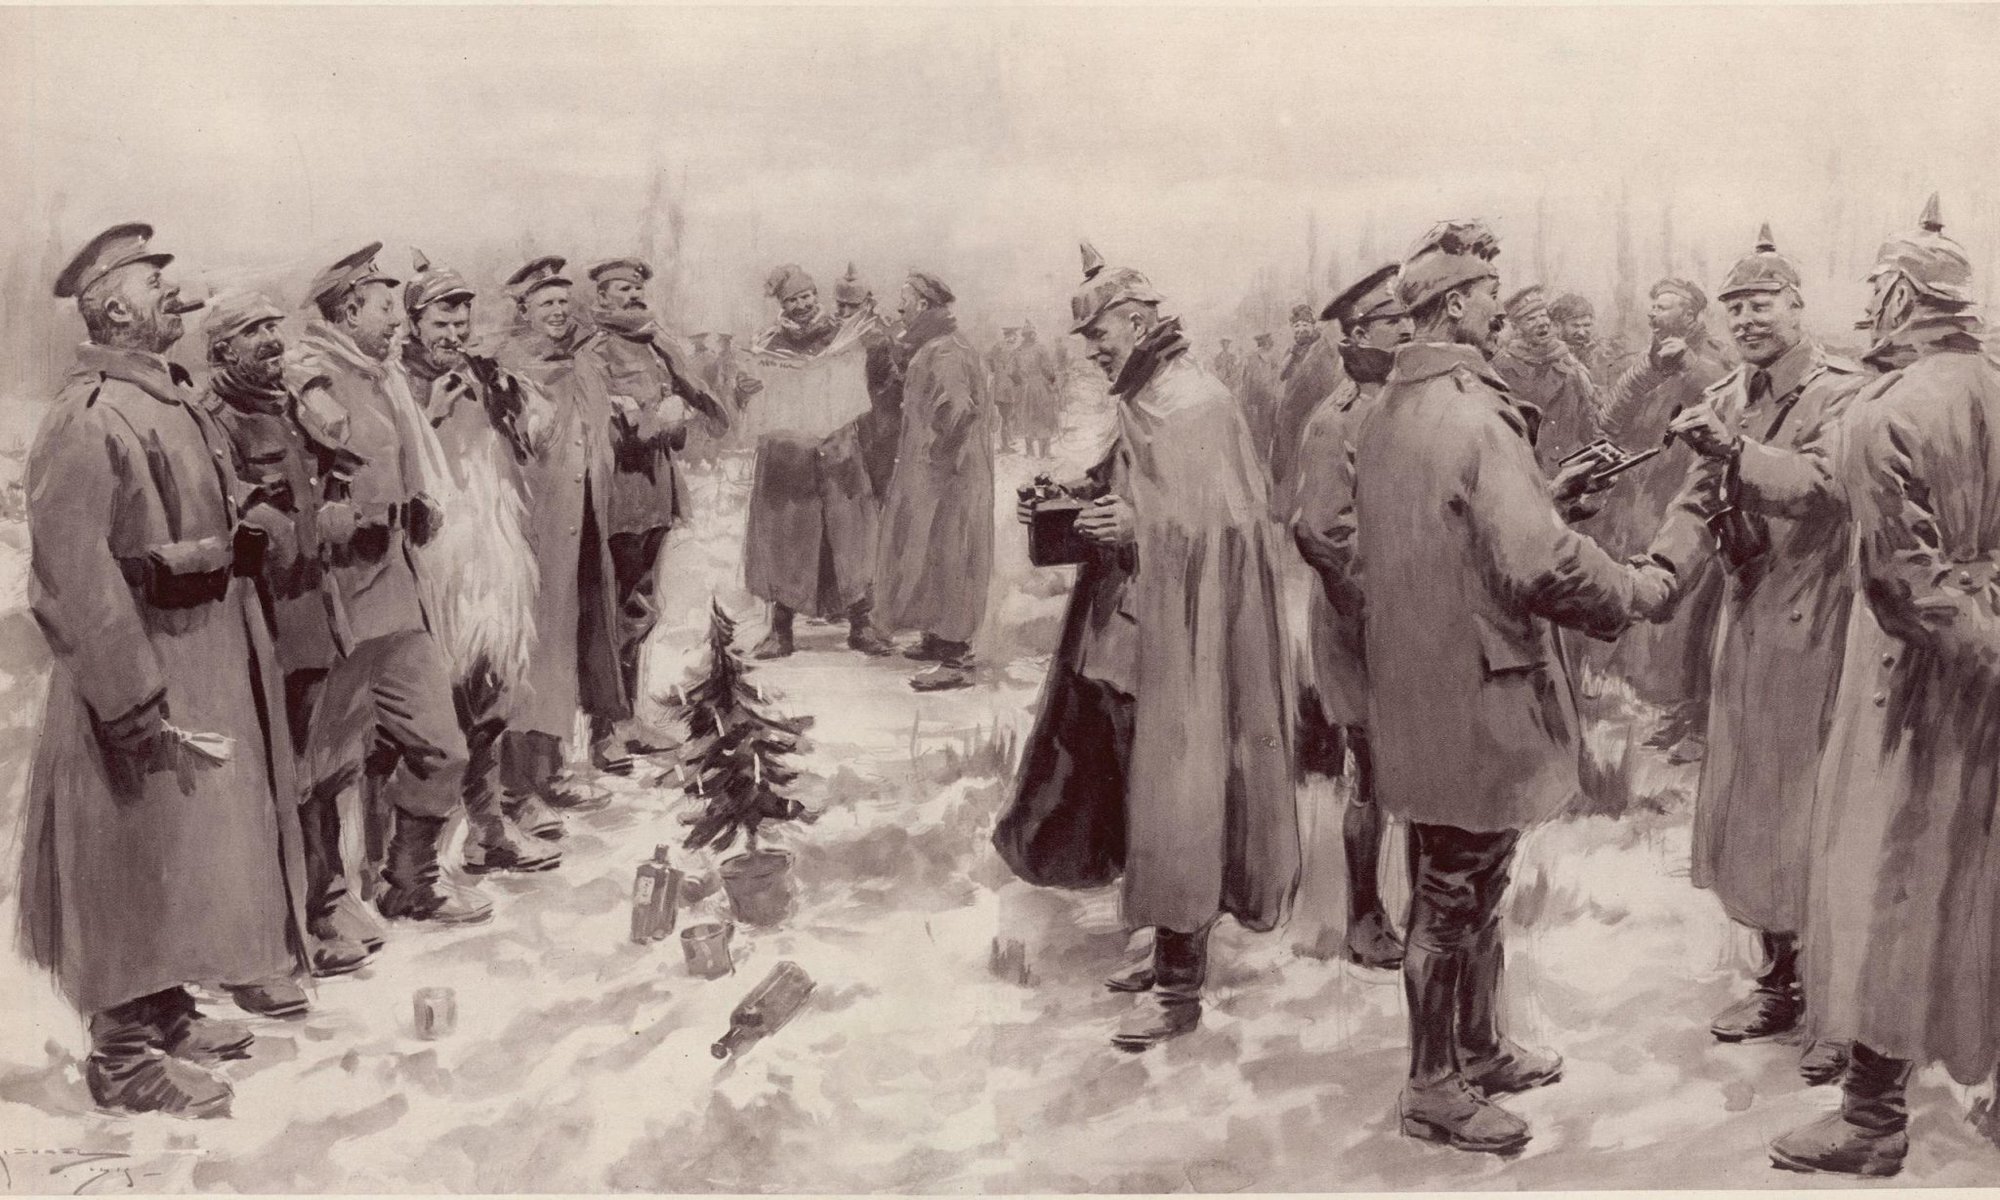 The Illustrated London News’s illustration of the Christmas Truce: “British and German Soldiers Arm-in-Arm Exchanging Headgear: A Christmas Truce between Opposing Trenches” The subcaption reads “Saxons and Anglo-Saxons fraternising on the field of battle at the season of peace and goodwill: Officers and men from the German and British trenches meet and greet one another—A German officer photographing a group of foes and friends.” Wikimedia Commons image.